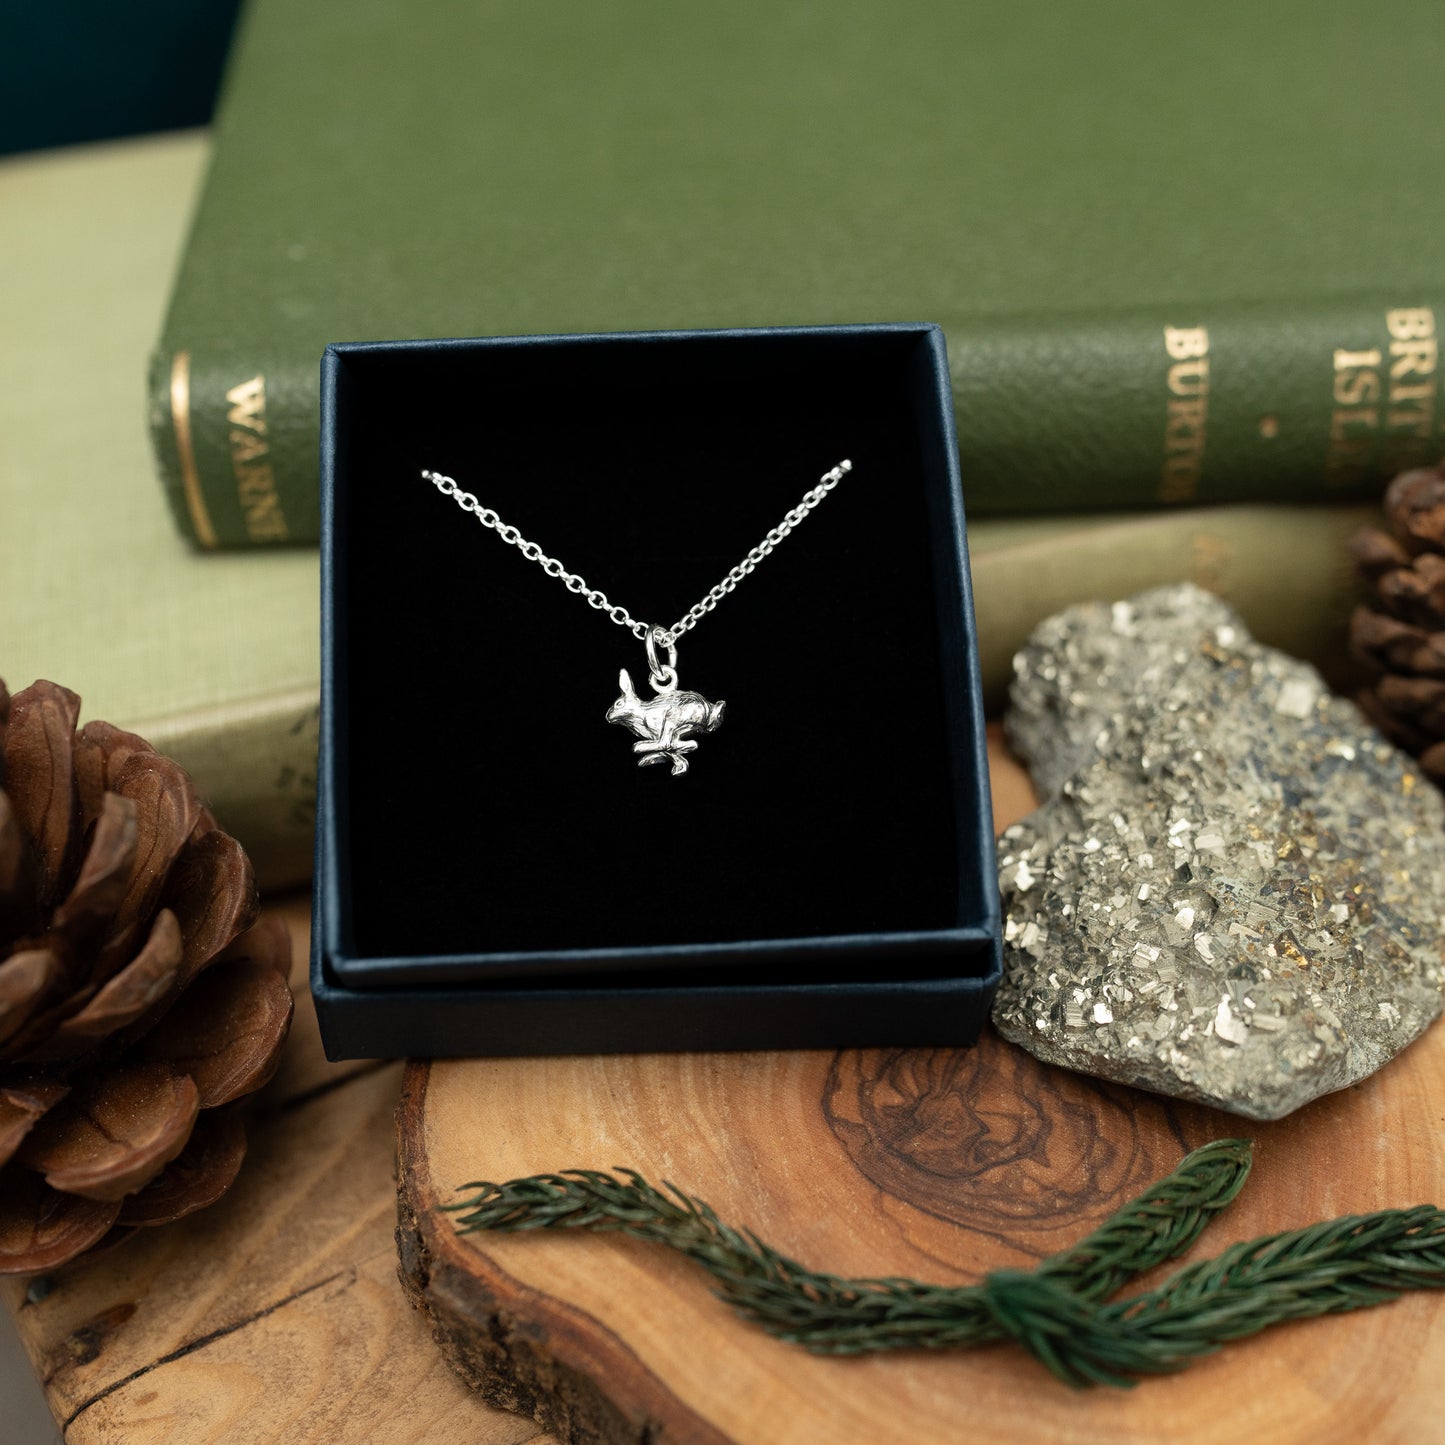 Small Silver Running Hare Charm Necklace